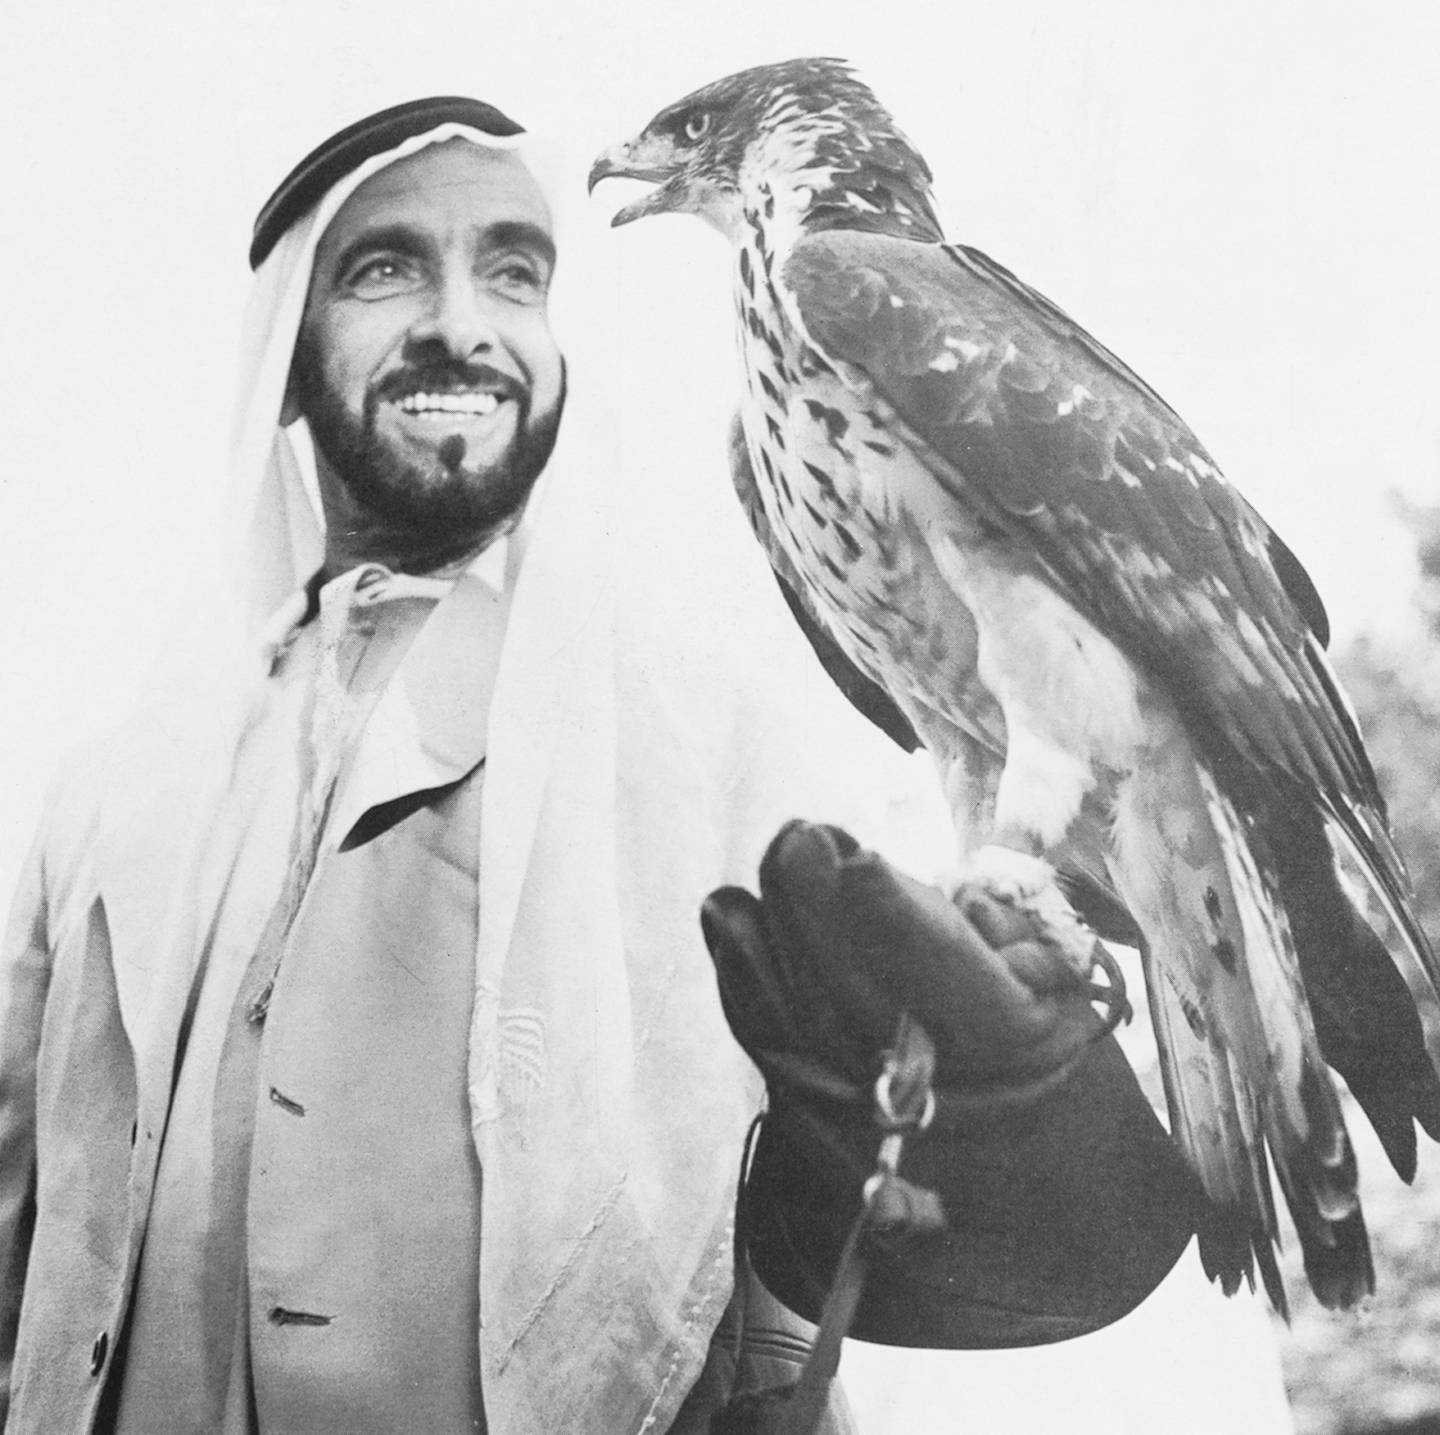 An image from the Itihad archive. Courtesy Al Itihad.Abu Dhabi, UAE. Sheikh Zayed hunting and horse riding. *** Local Caption ***  Z (69).JPG